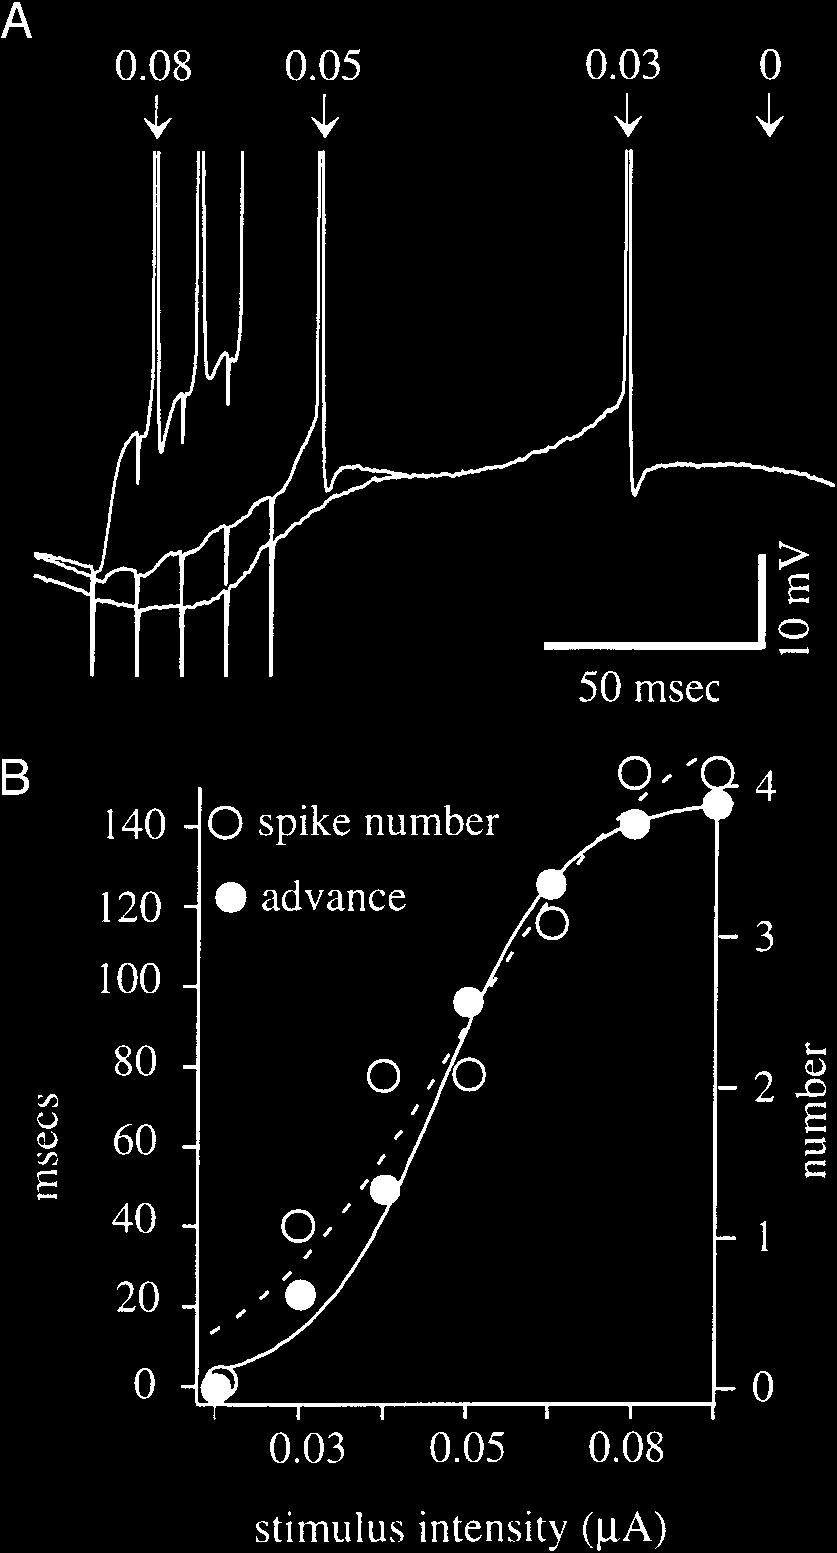 530 J. C. MAGEE the number of spikes initiated when compared with more proximal input.